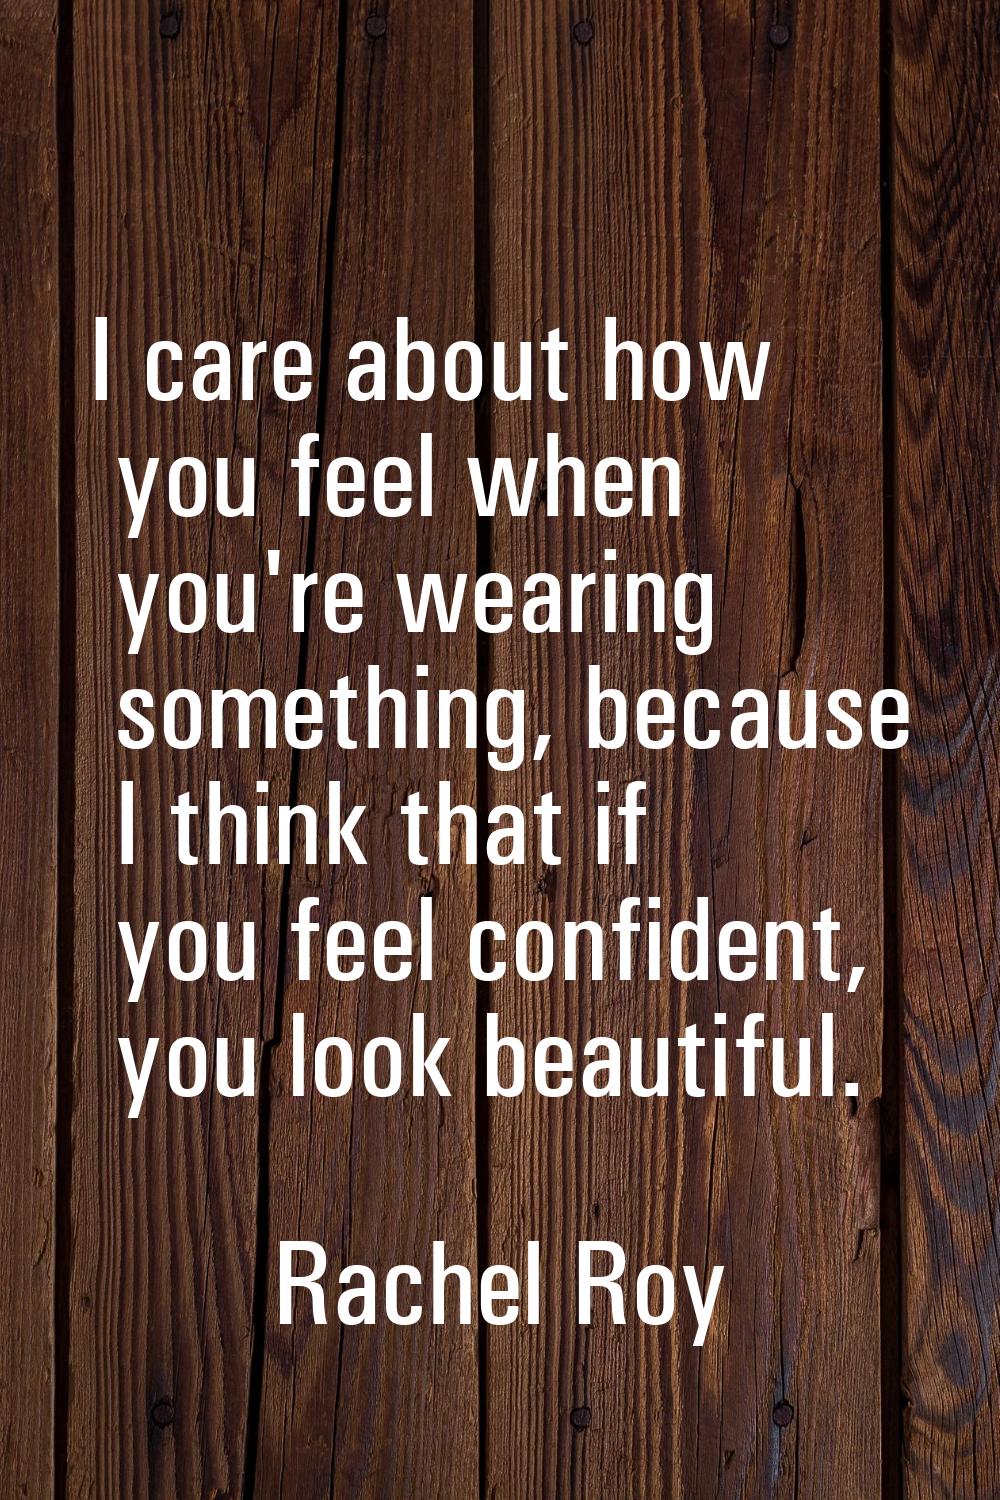 I care about how you feel when you're wearing something, because I think that if you feel confident